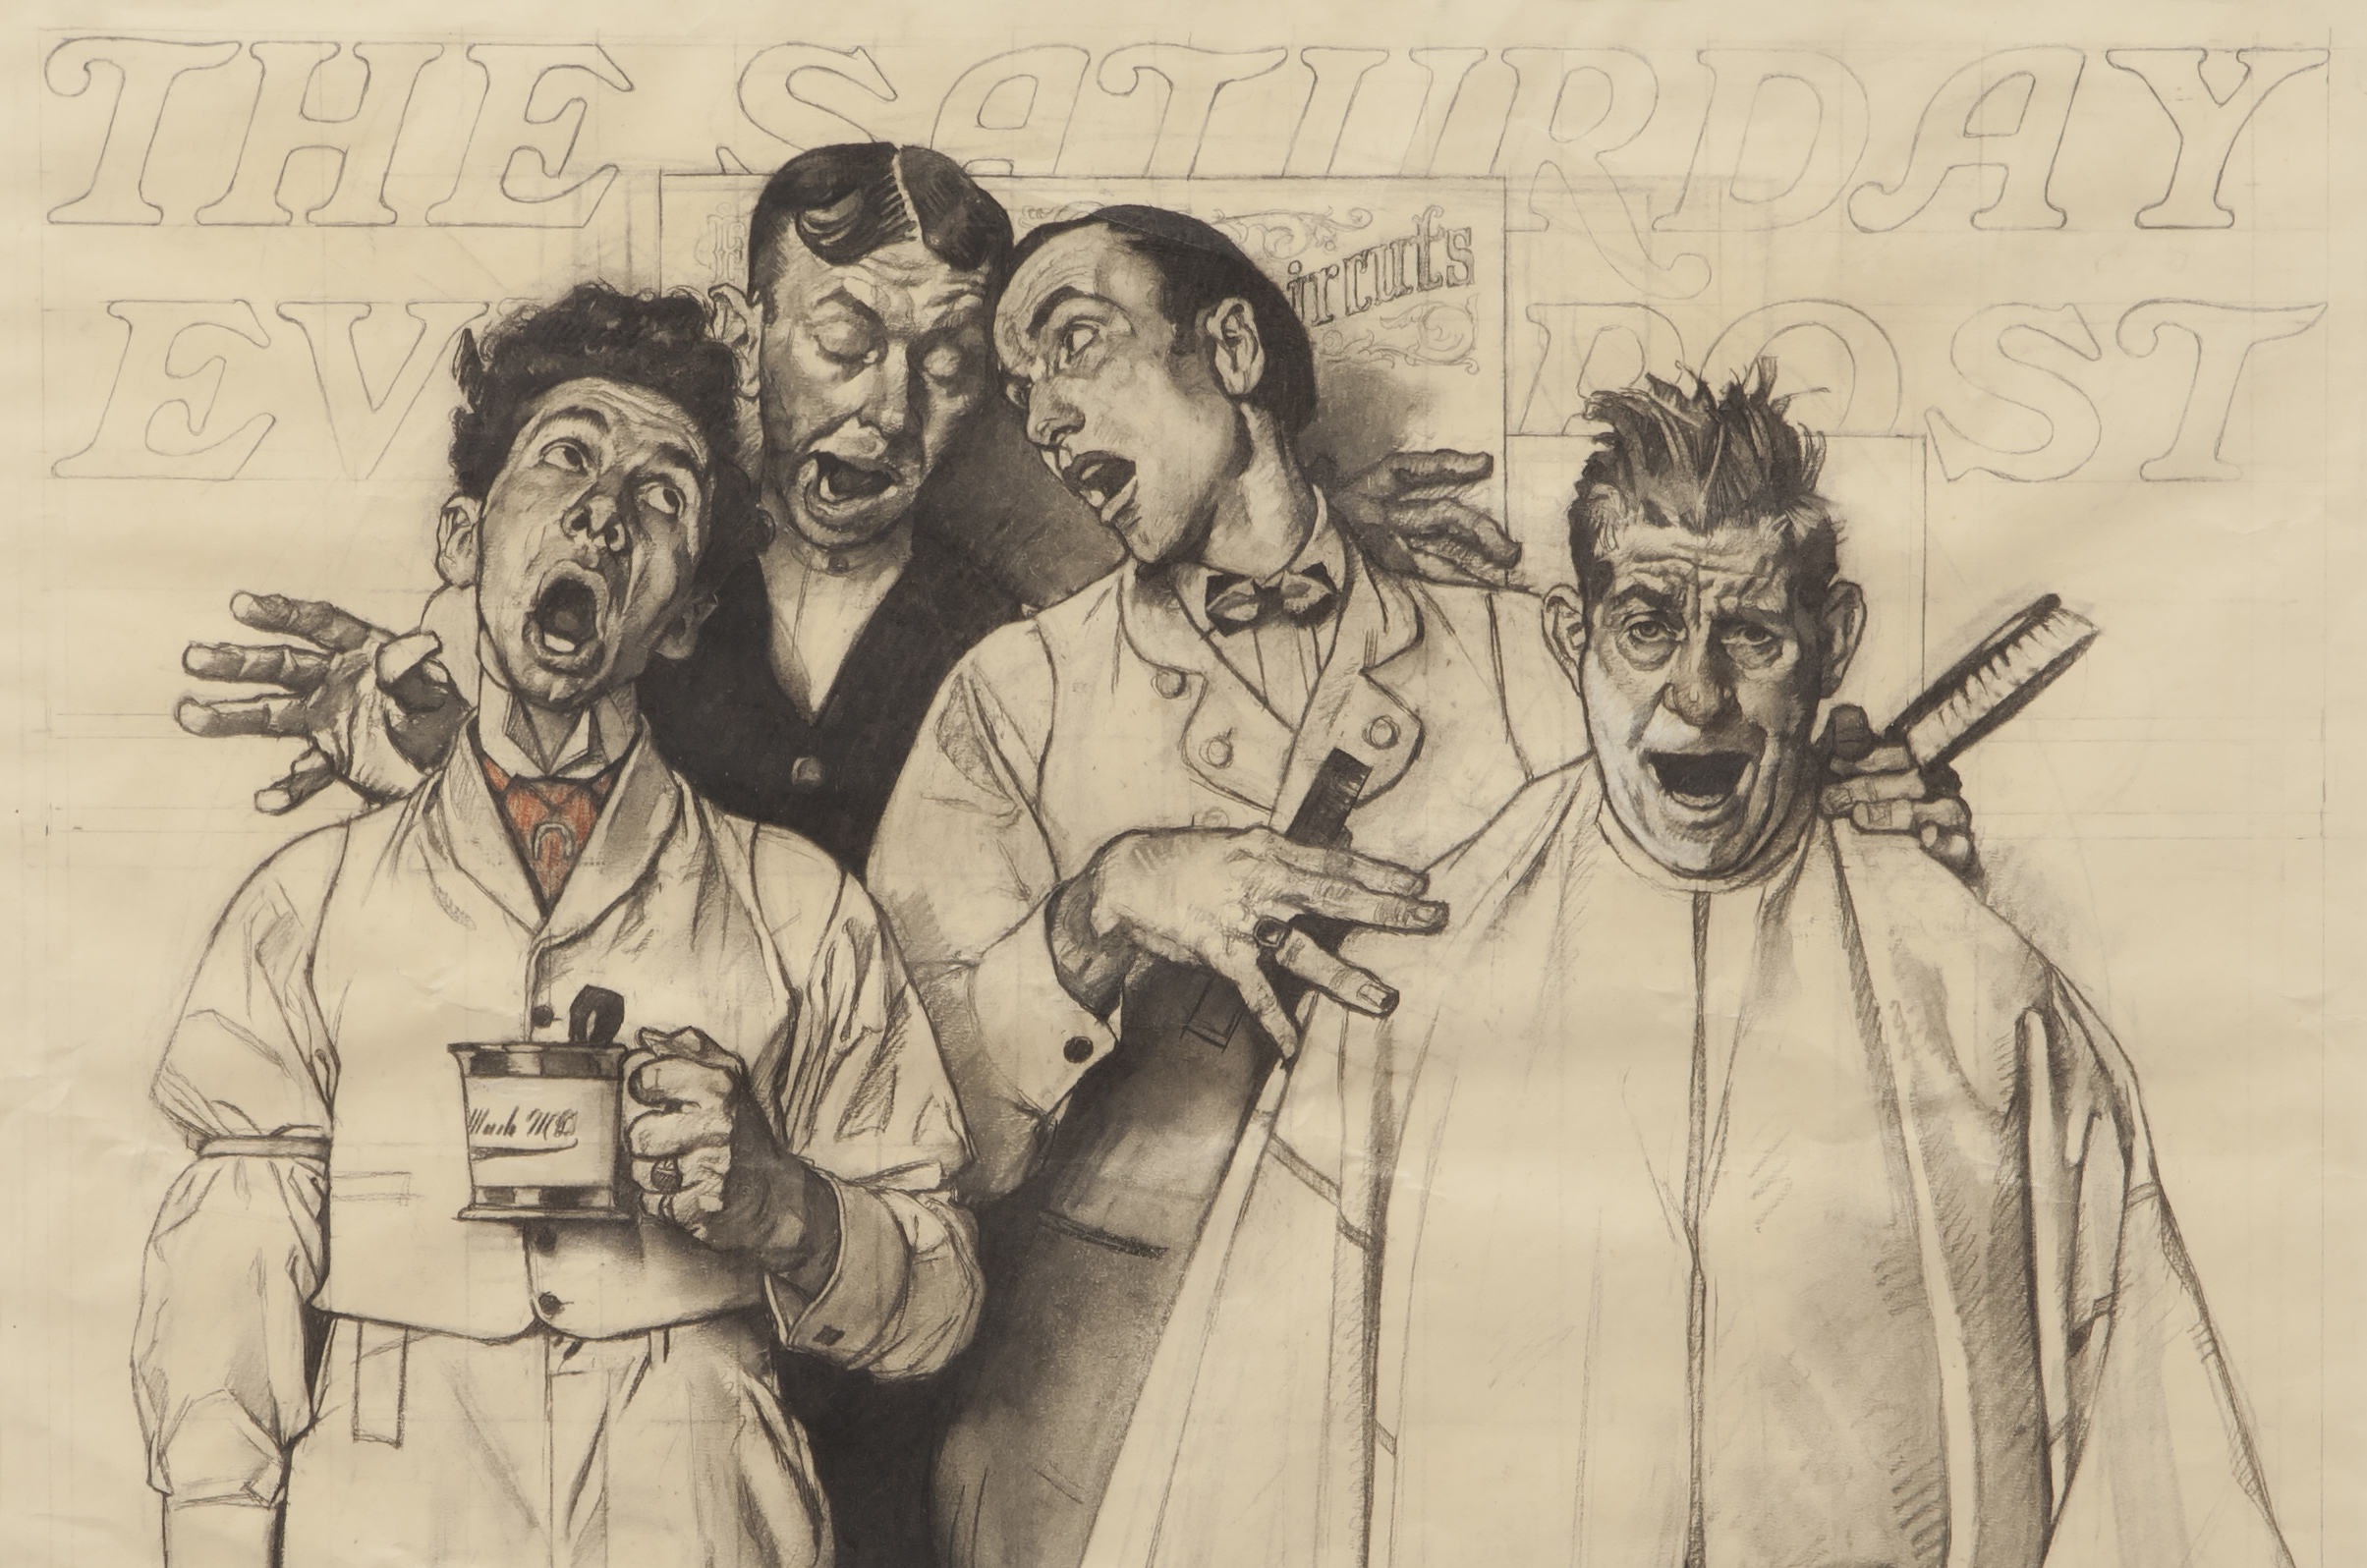 Detail of 'Barbershop Quartet' by Norman Rockwell, charcoal and colored pencil on paper. Estimate $100,000-$150,000. Dallas Auction Gallery images